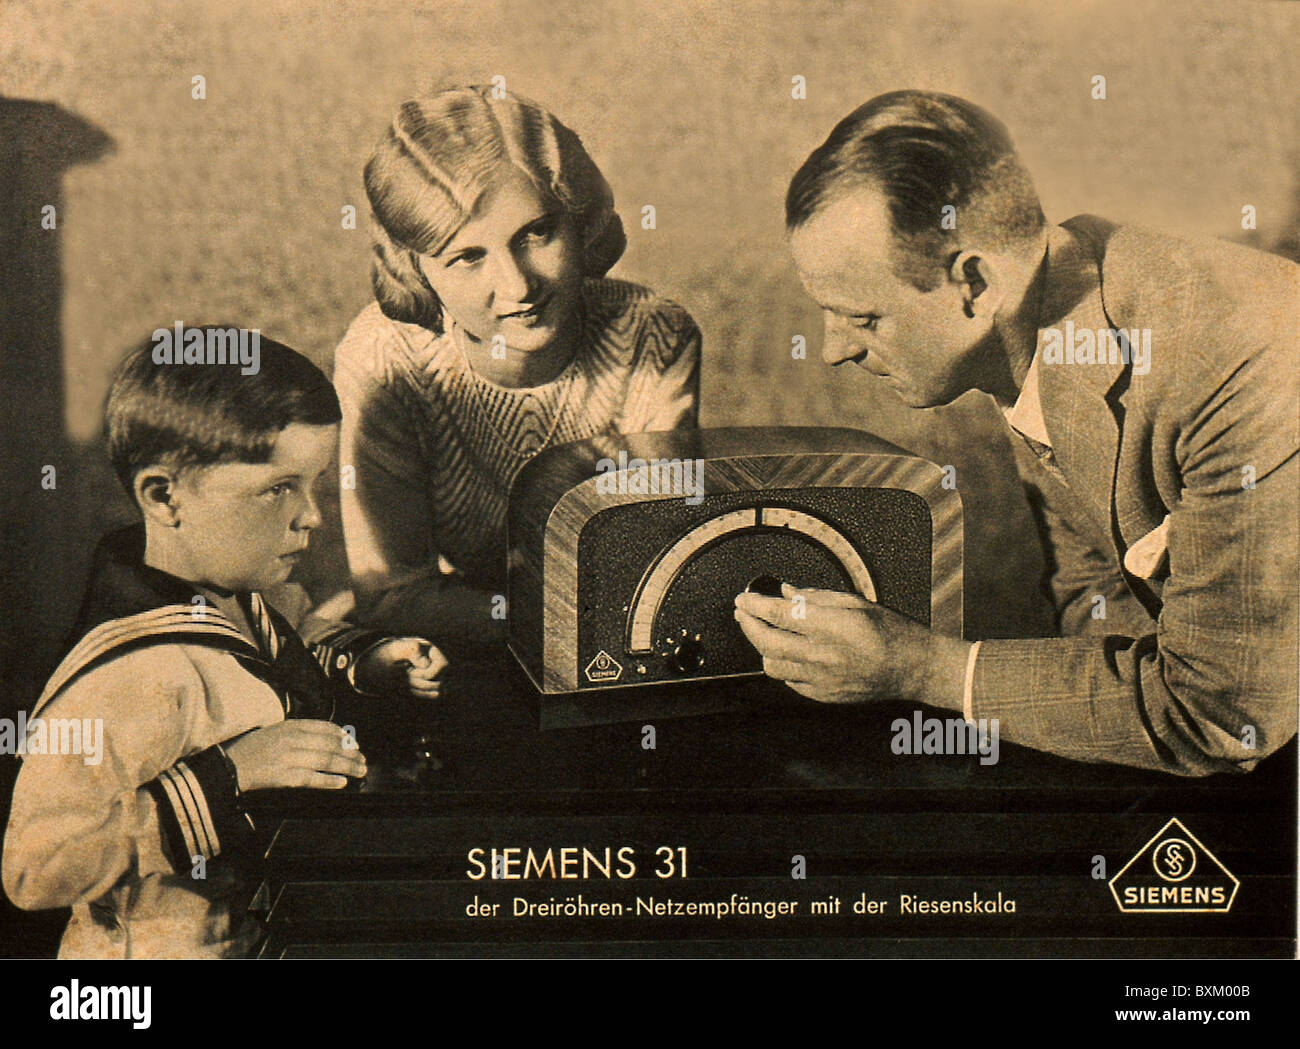 broadcast, radio, family is listening to the radio, Siemens radio type 31, advertising, Germany, 1930, 1930s, 30s, 20th century, historic, historical, listener, listeners, parent, parents, son, sons, sailor suit, media consumption, home electronics, consumer electronics, entertainment electronics, home entertainment, people, nostalgia, Additional-Rights-Clearences-Not Available Stock Photo